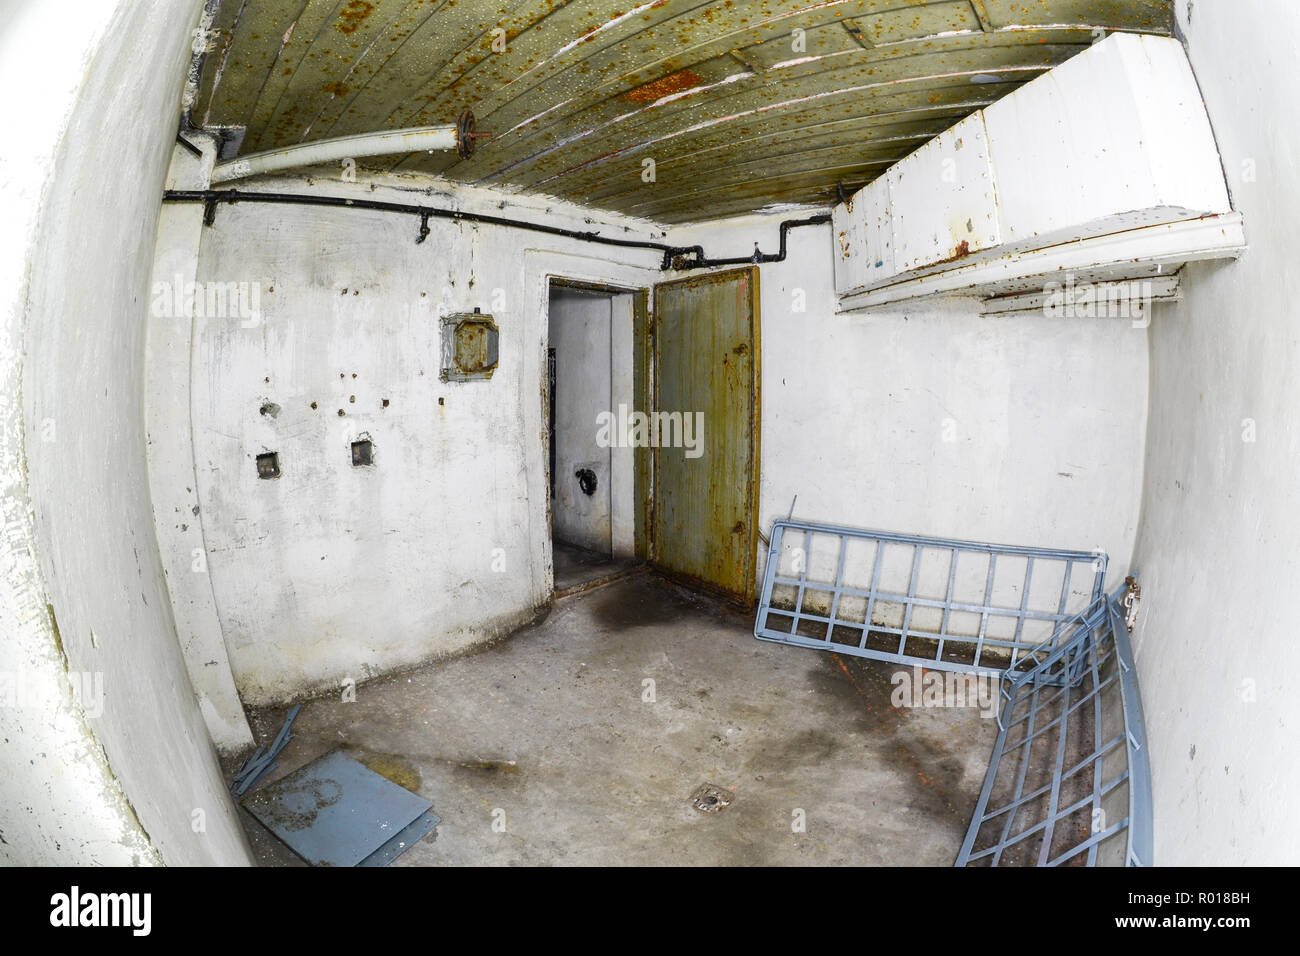 Abandoned and devastated interior of Cold War coastal defence fortification in Hel, Poland. Stock Photo